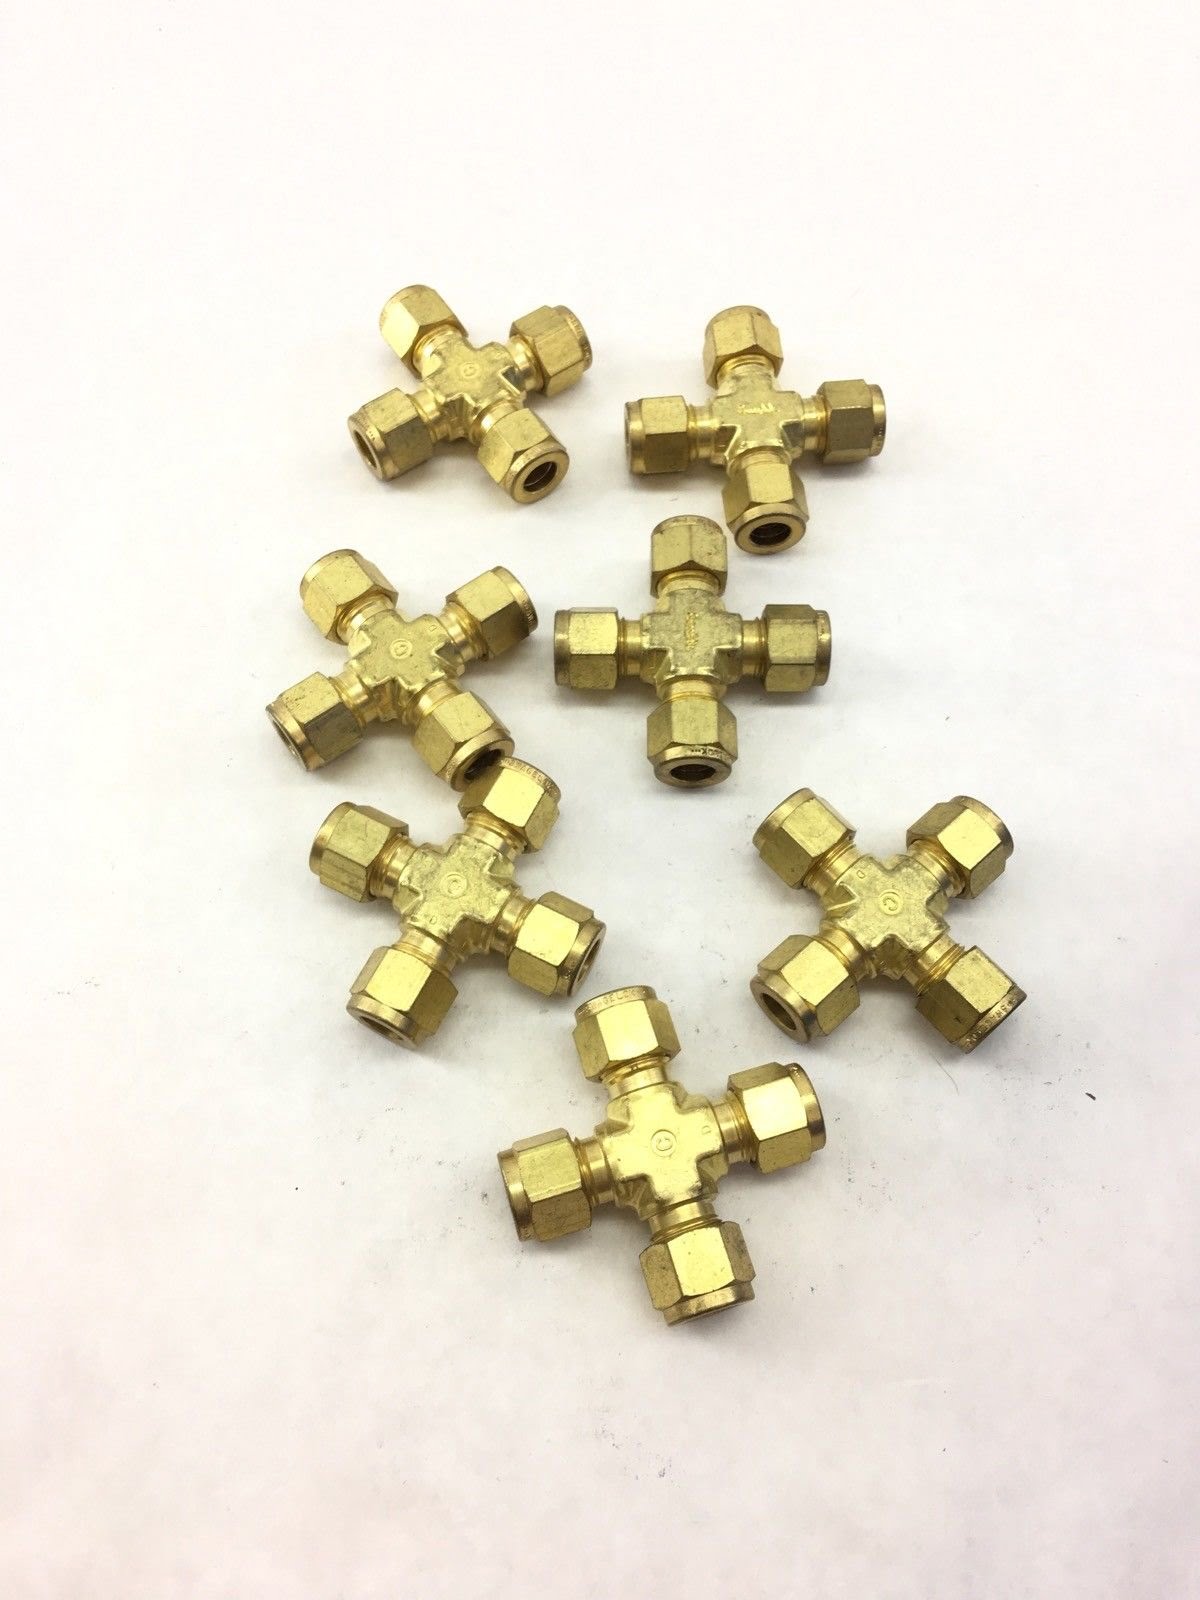 LOT OF 7 SWAGELOK BRASS 3/8 TUBE UNION CROSS CONNECTOR FITTING